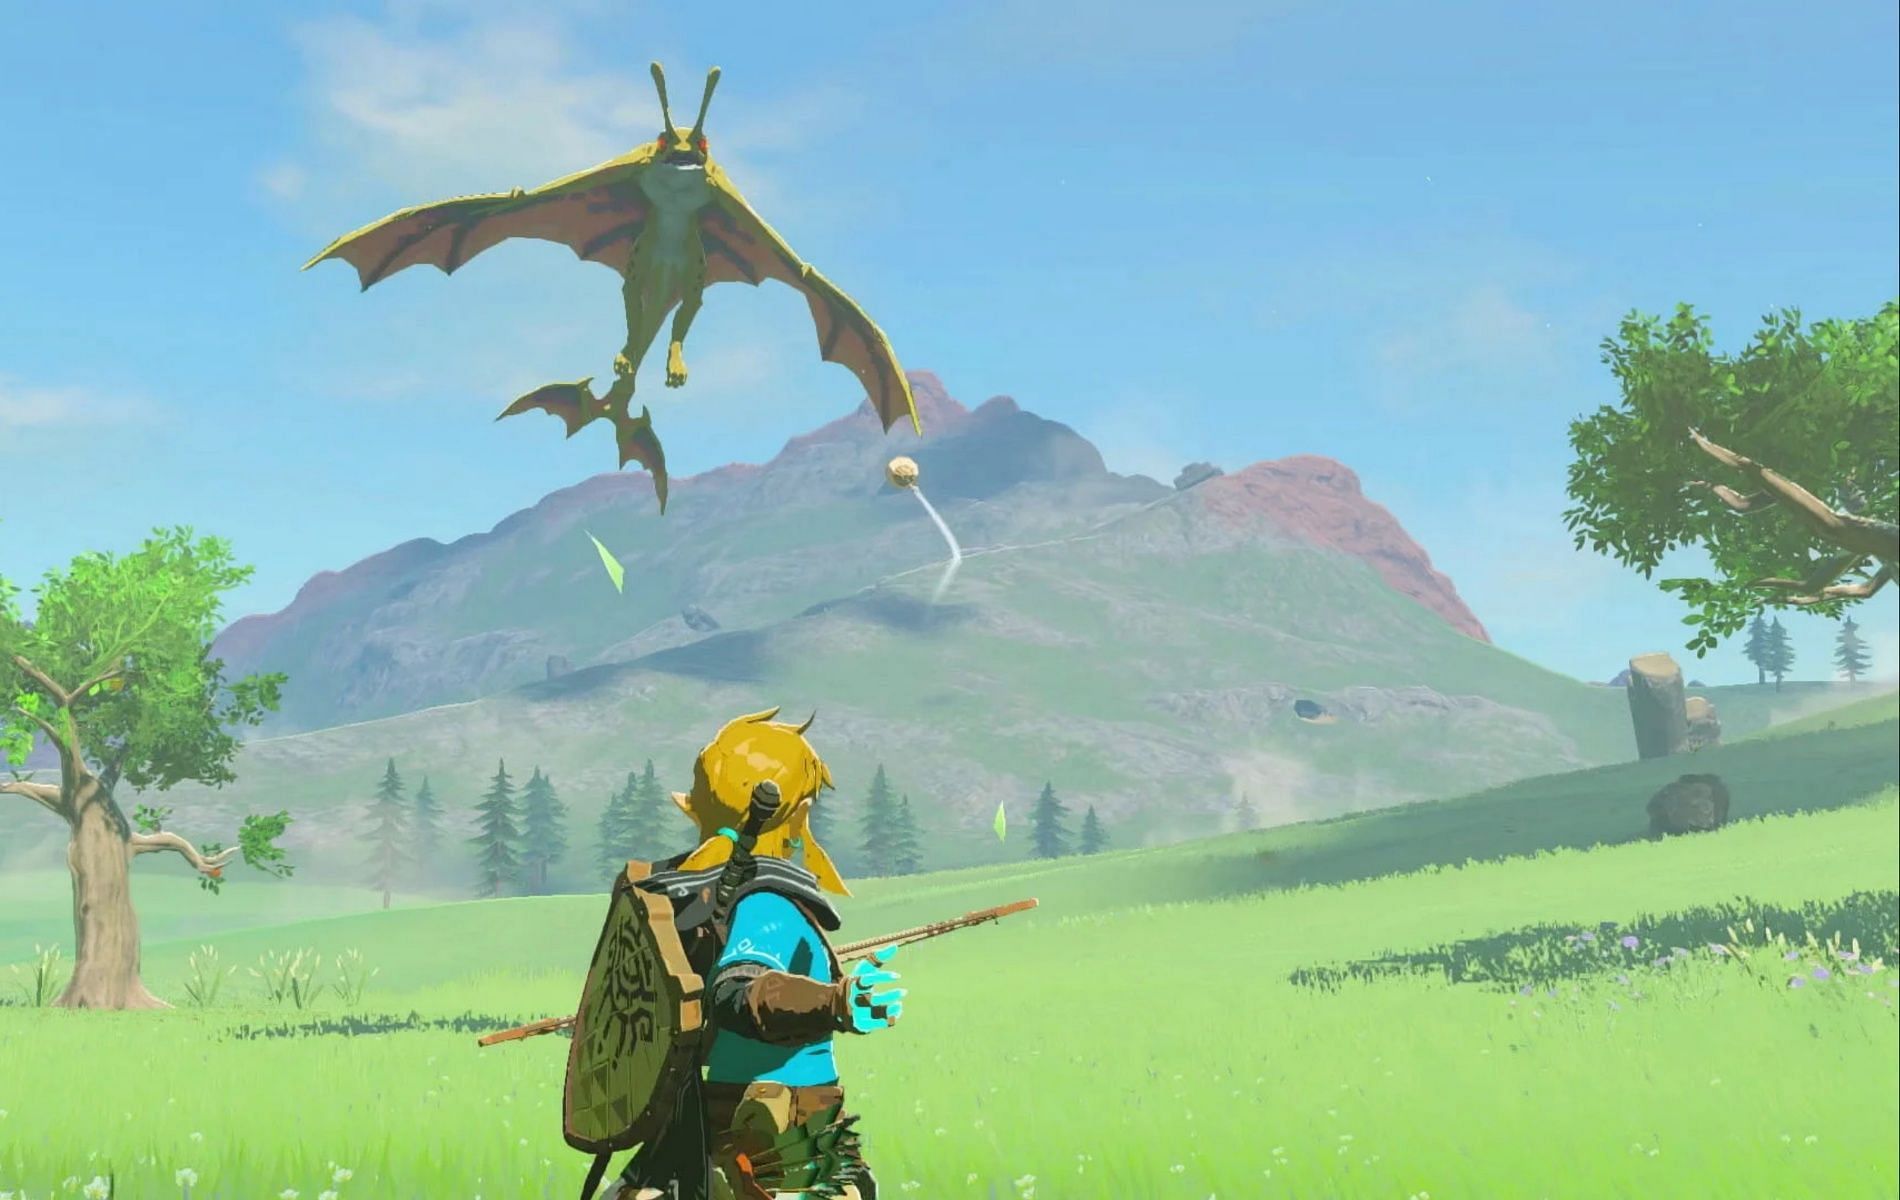 How Long Is 'The Legends Of Zelda: Tears Of The Kingdom,' Exactly?